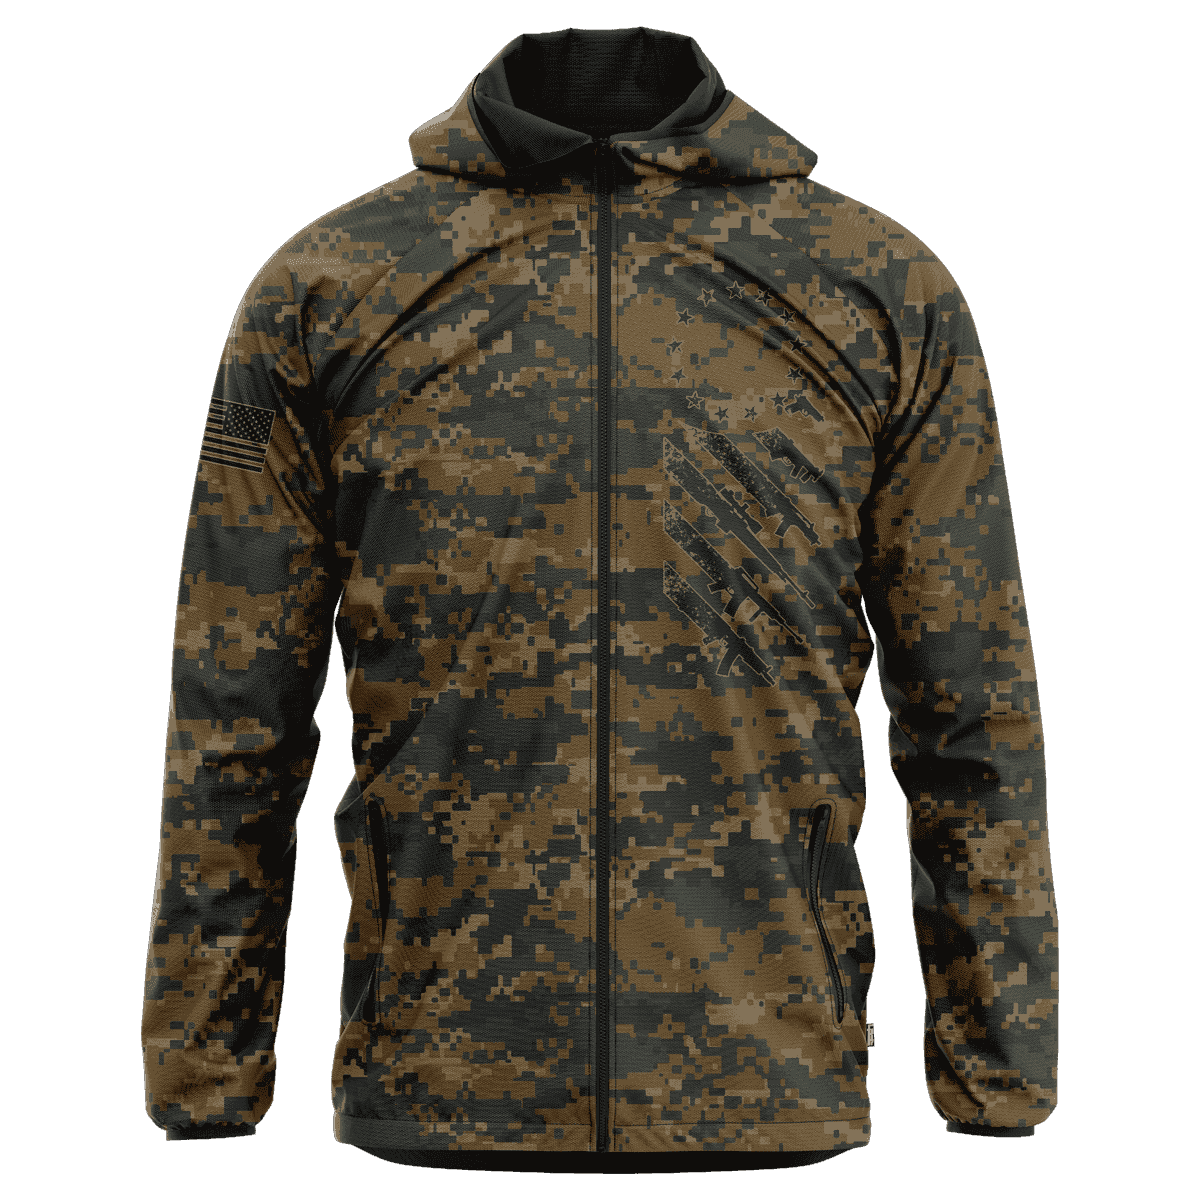 Thumbnail for Woodland Digital Camo We The People Jacket - Greater Half